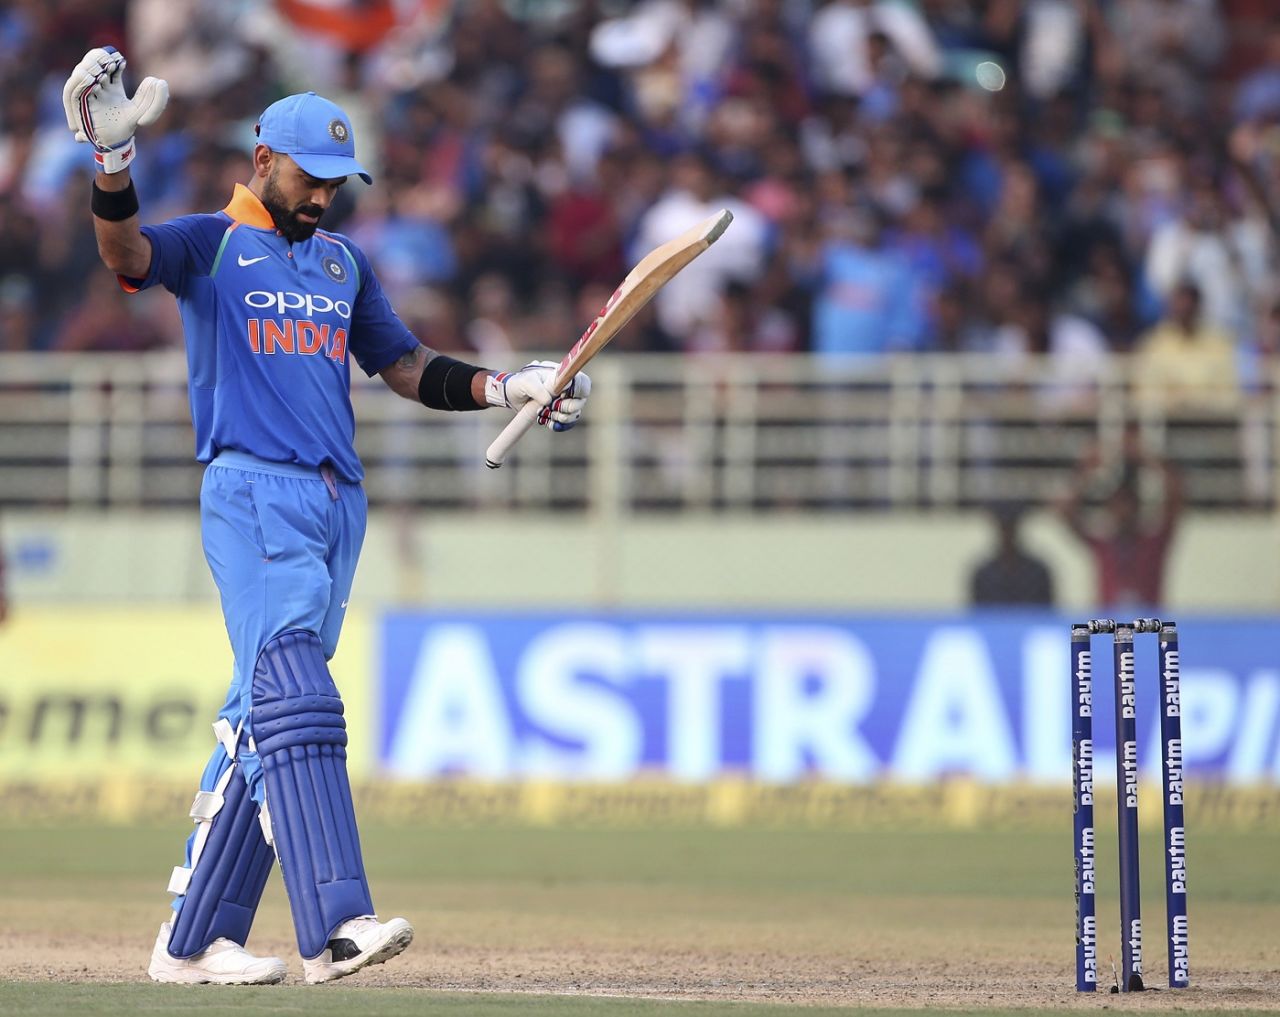 Virat Kohli acknowledges the cheers after becoming the quickest to 10,000 ODI runs, India v West Indies, 2nd ODI, Visakhapatnam, October 24, 2018